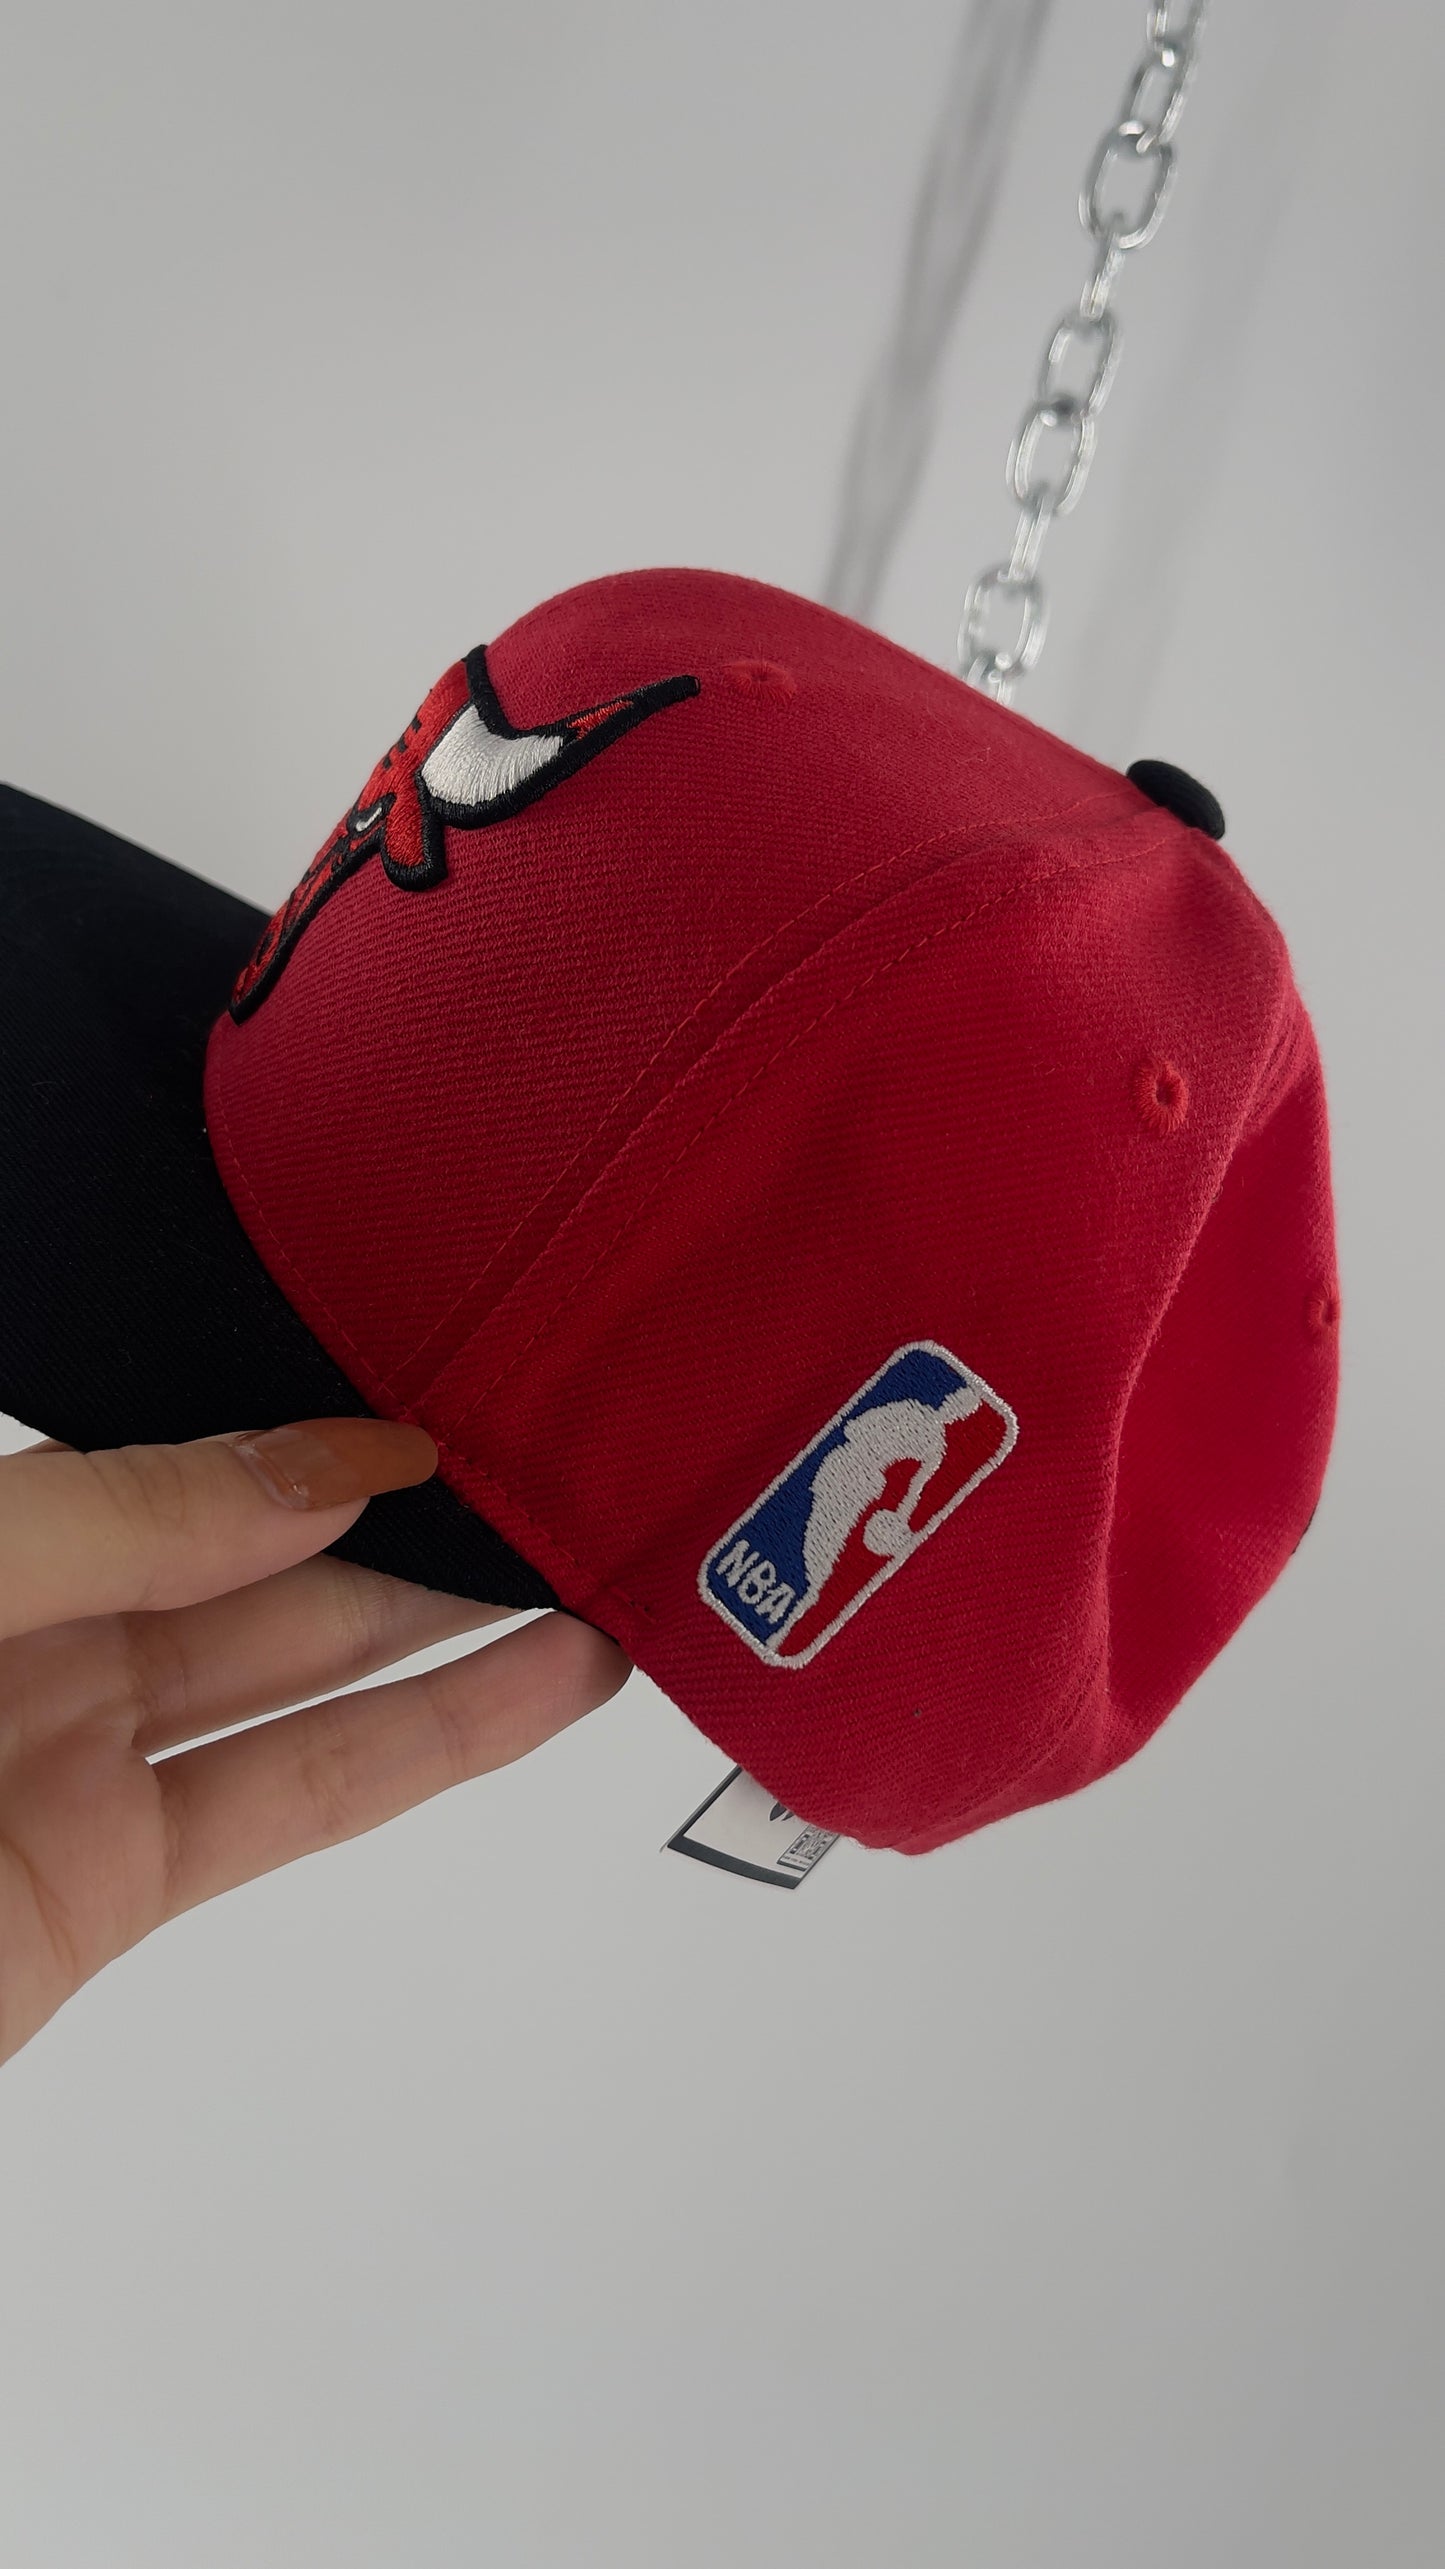 Mitchell and Ness Chicago Bulls Embroidered Snap Back